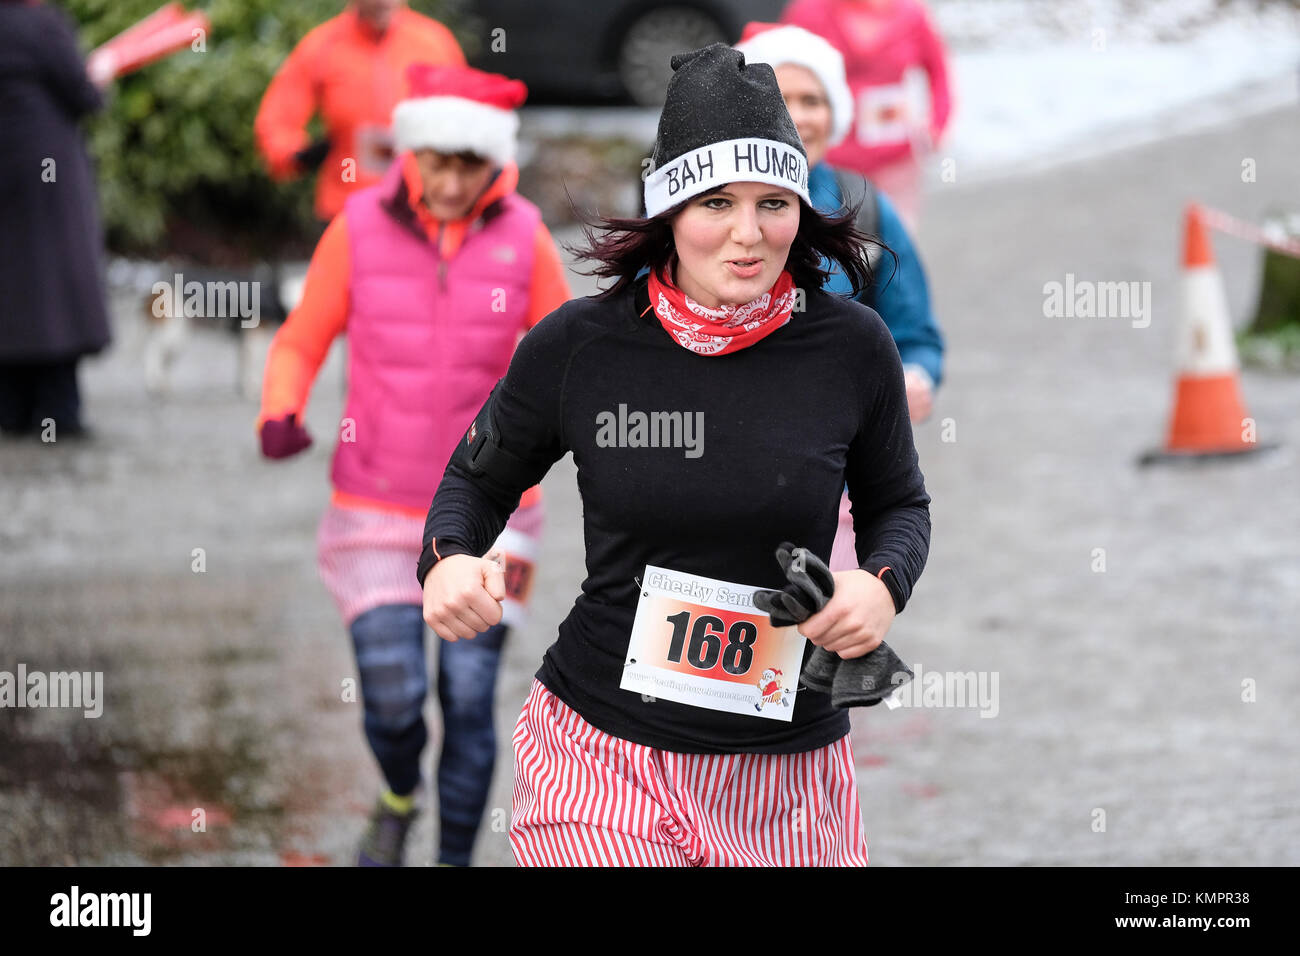 Young woman with Bah Humbug hat running in Santa Dash in freezing conditions to raise money for bowel cancer charity Stock Photo